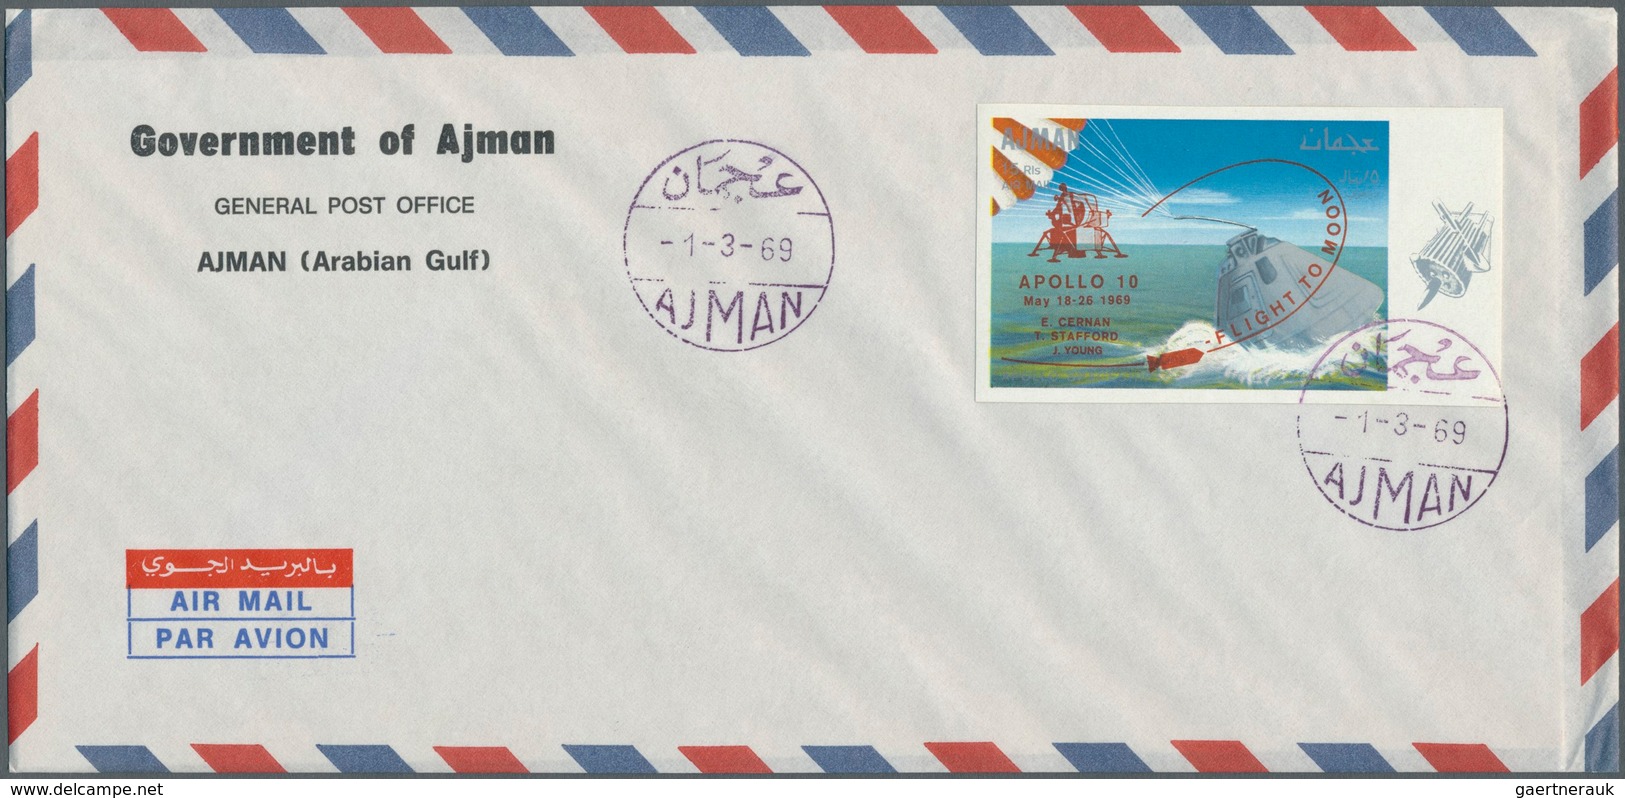 08015 Adschman / Ajman: 1969, SPACE (Apollo 9+10, Gagarin, White), four values with overprint perf./imperf